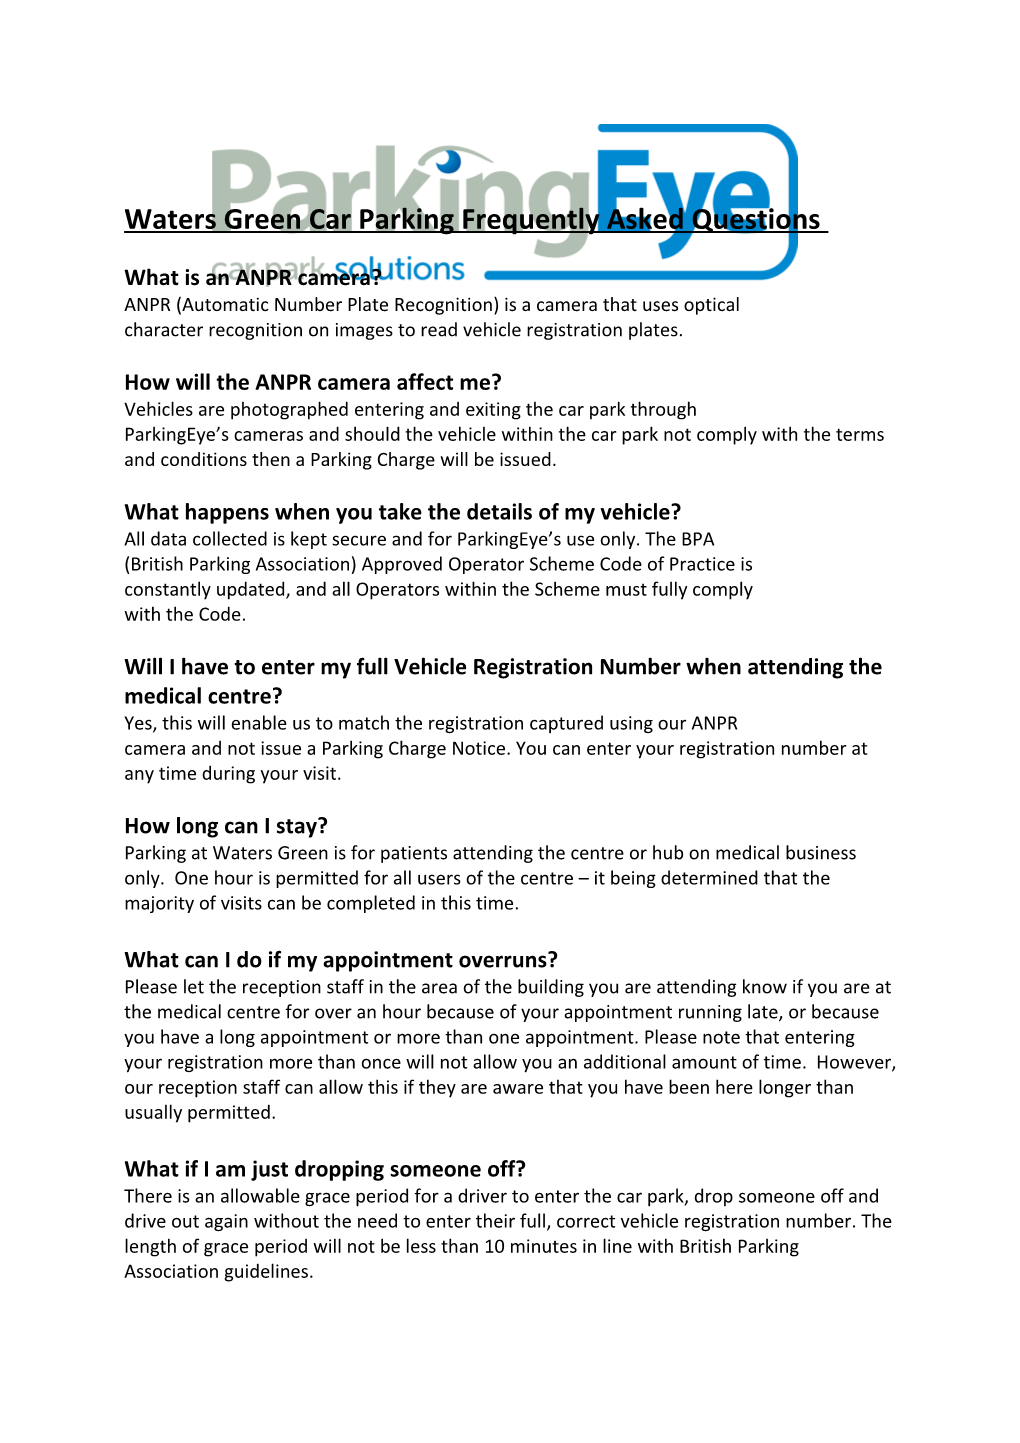 Waters Green Car Parking Frequently Asked Questions